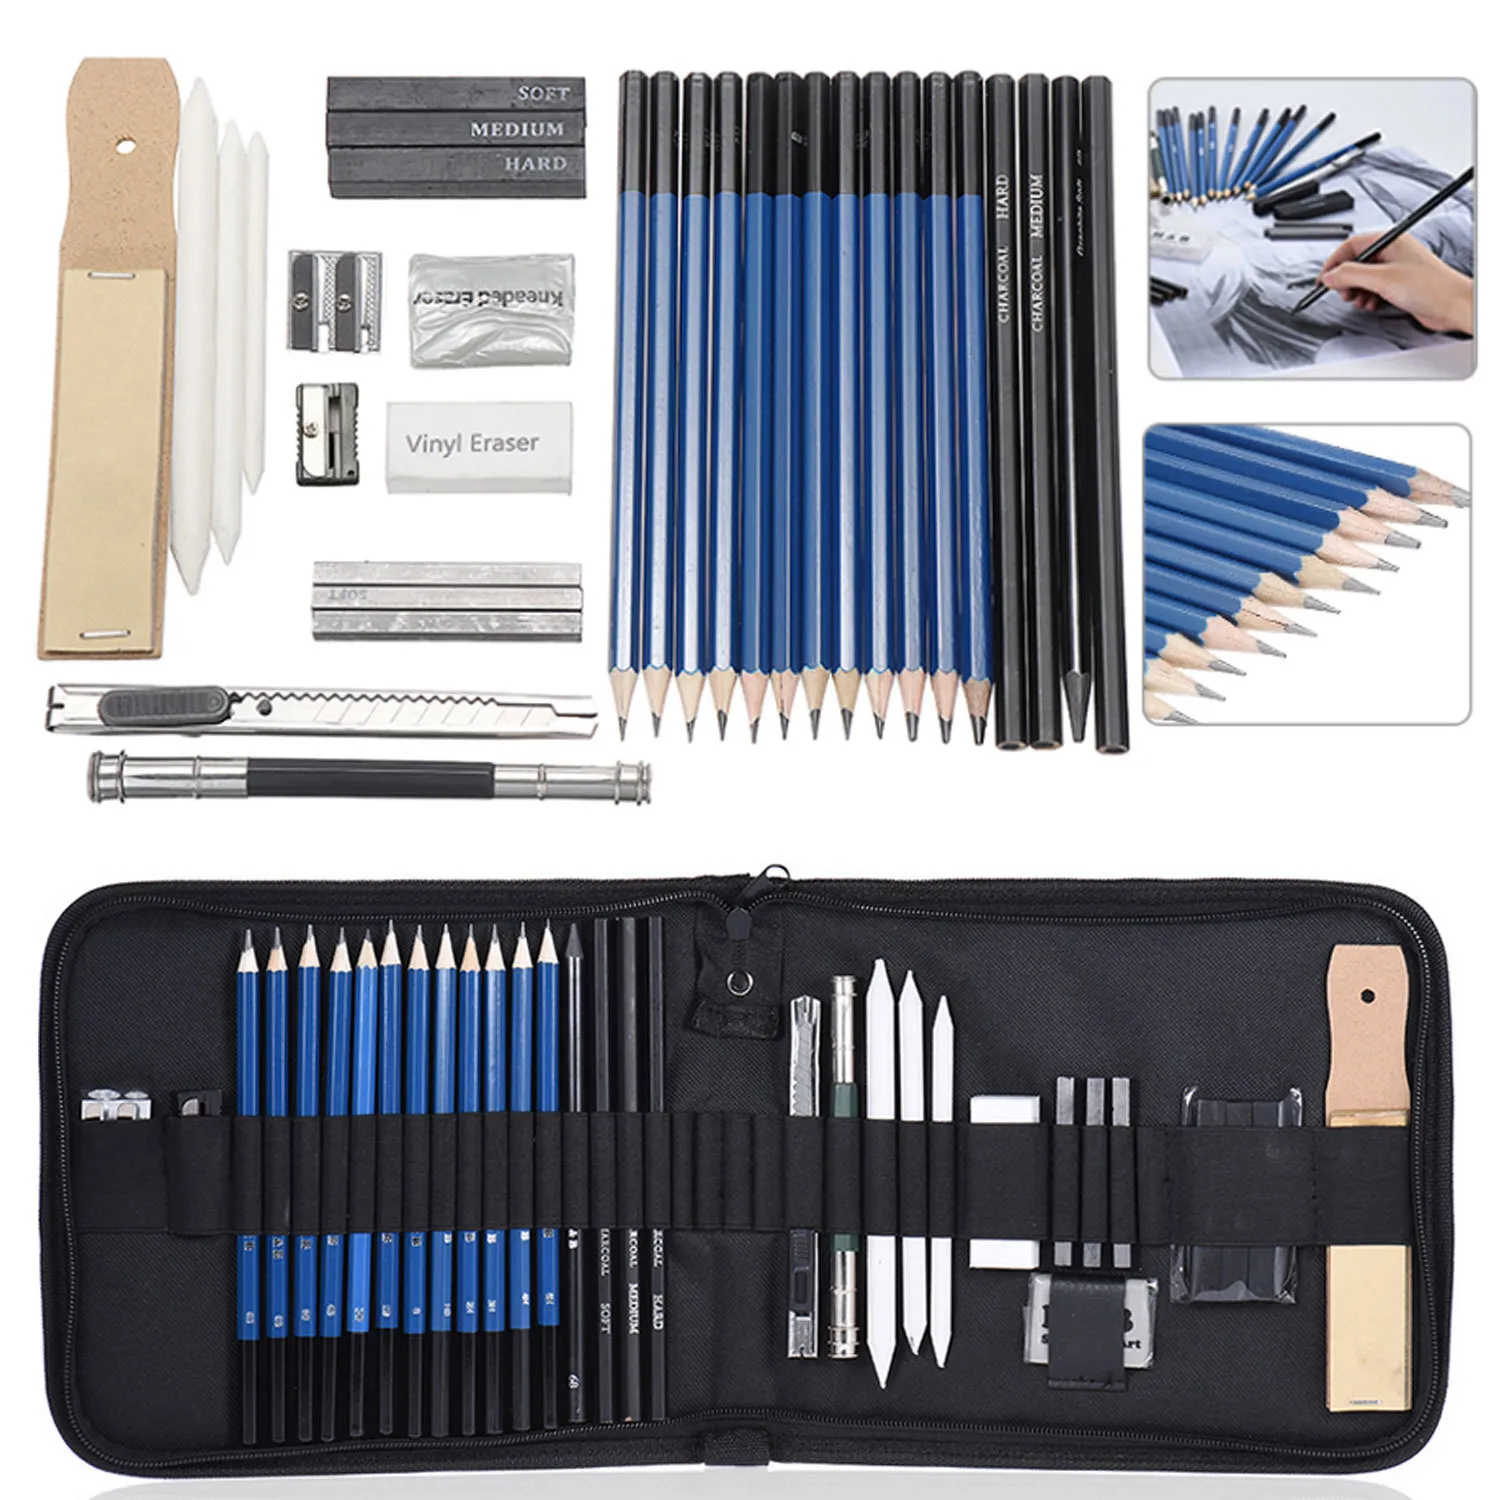 Wholesale Complete Sketching Kit Set With Artist Eraser Pencil, And  Sharpener Ideal For Beginners And Students From Cong09, $14.05